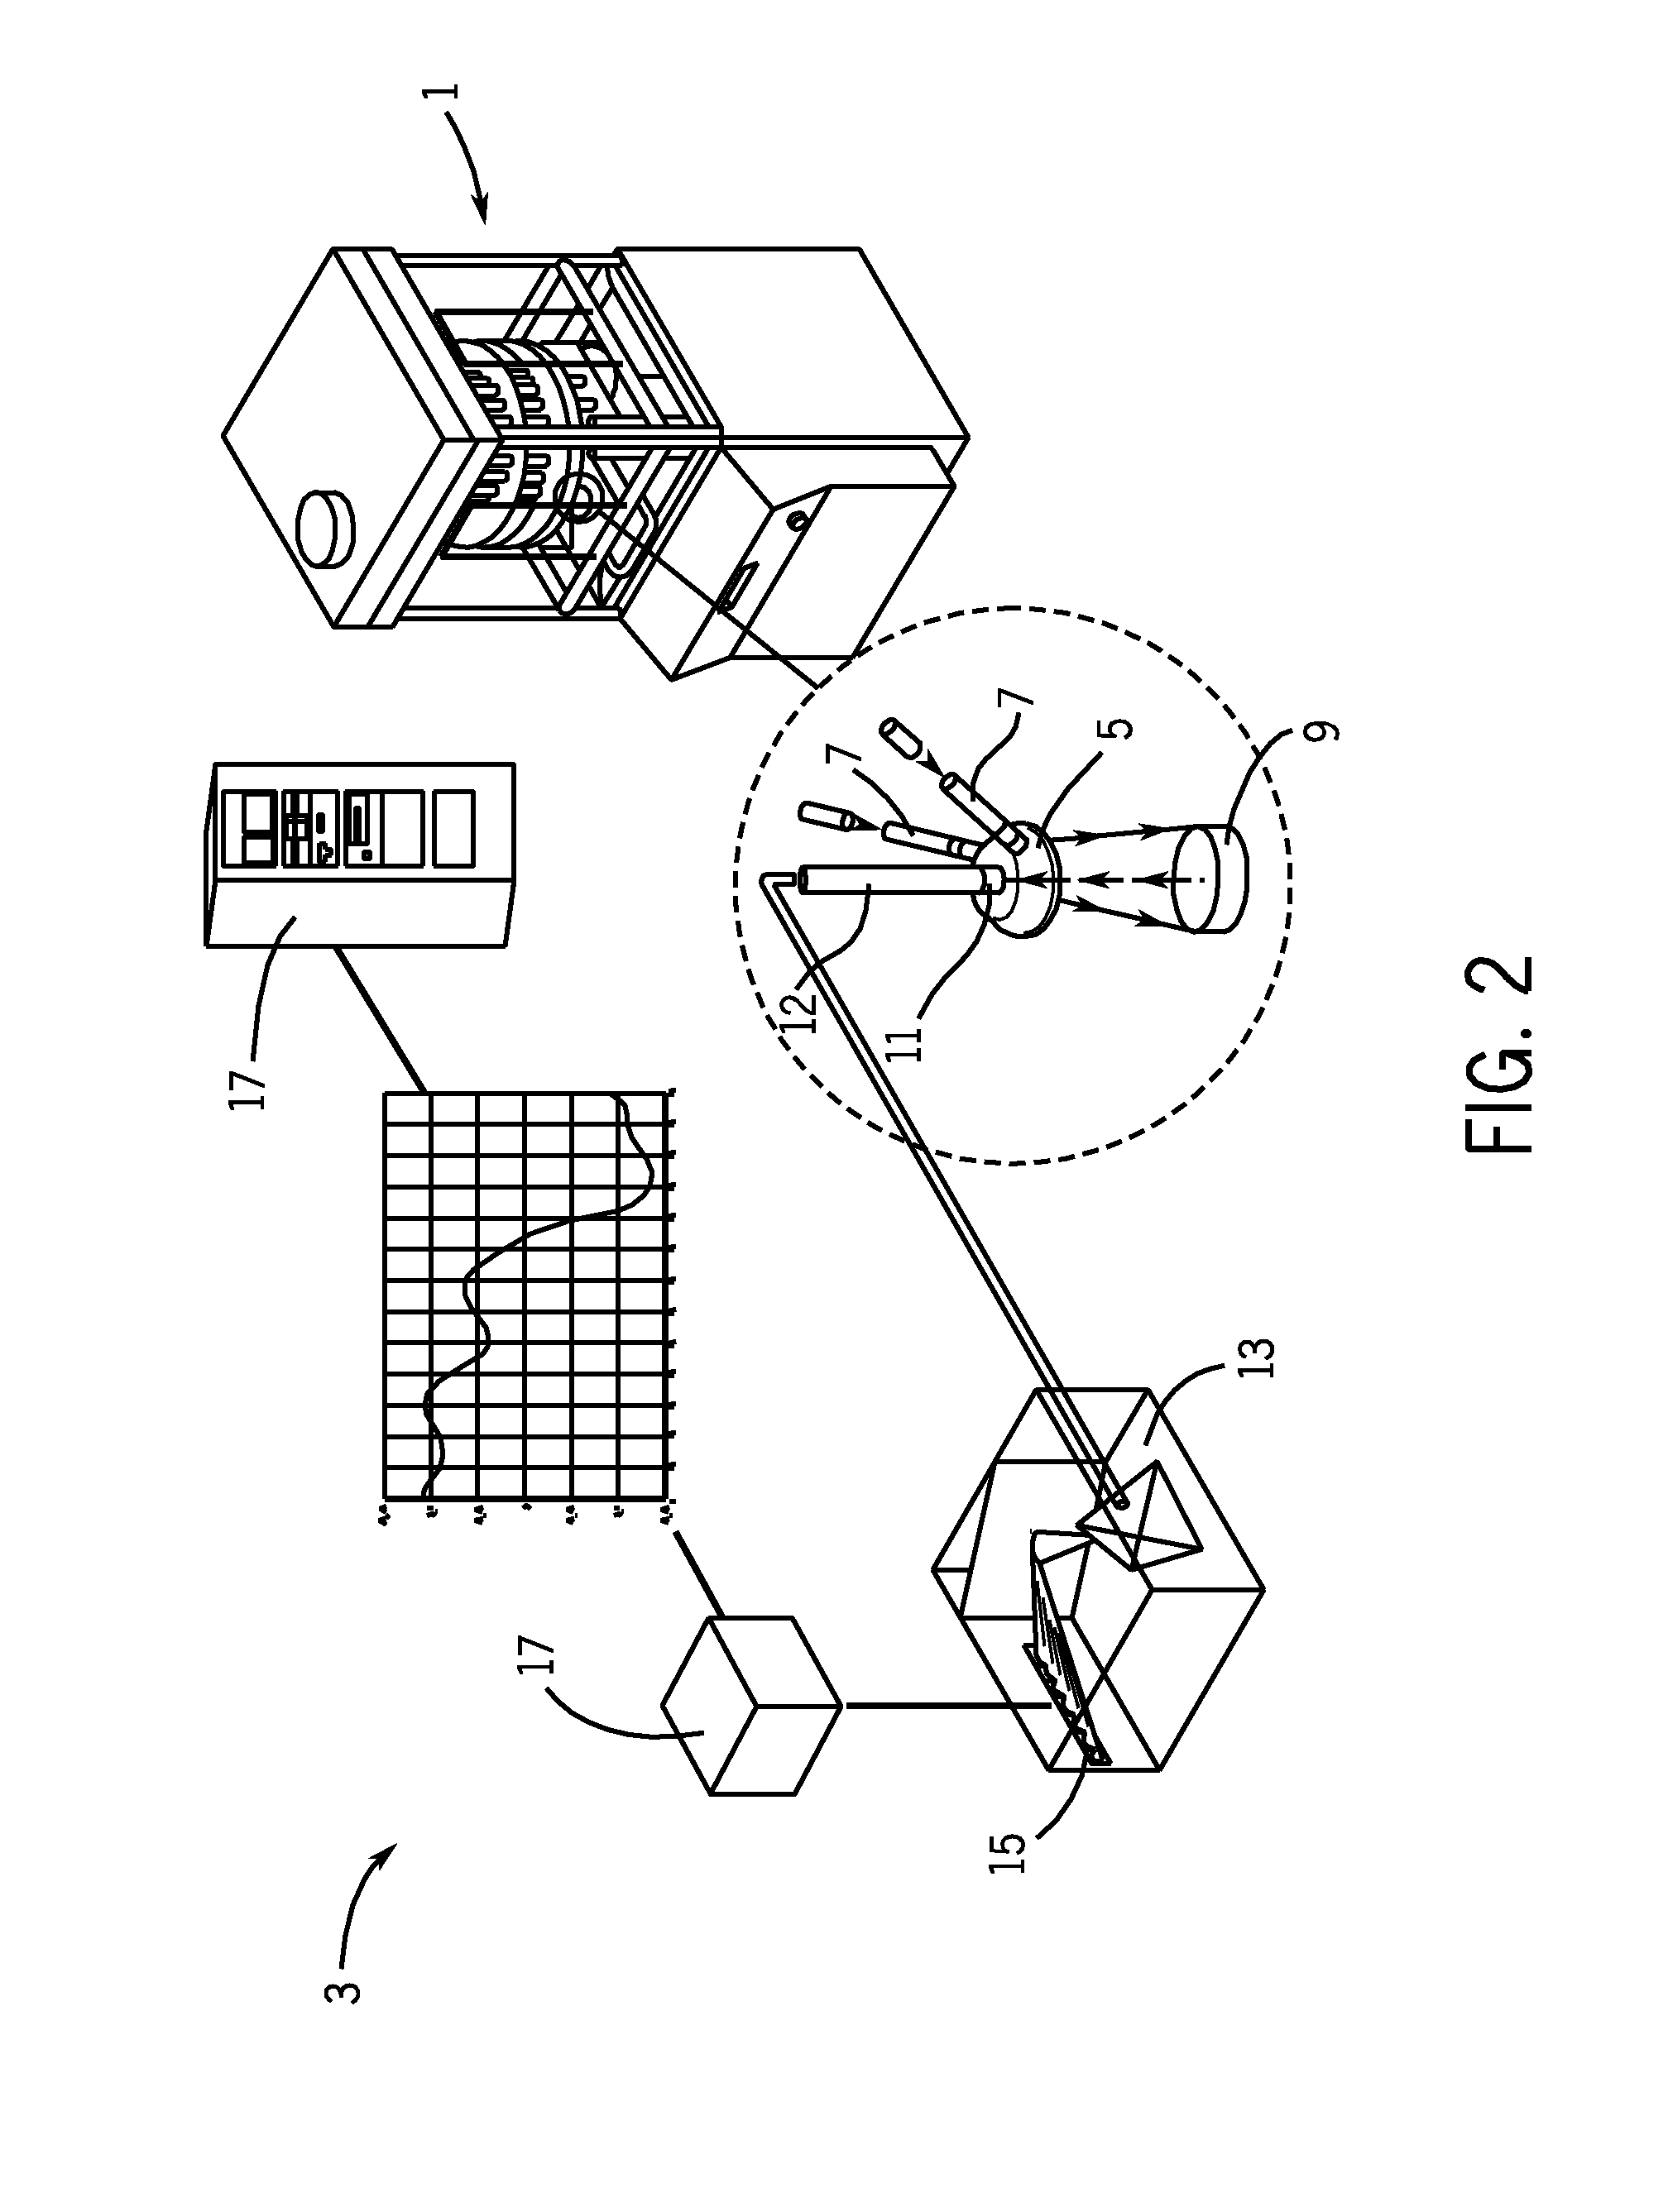 System for Producing and Checking Tablets